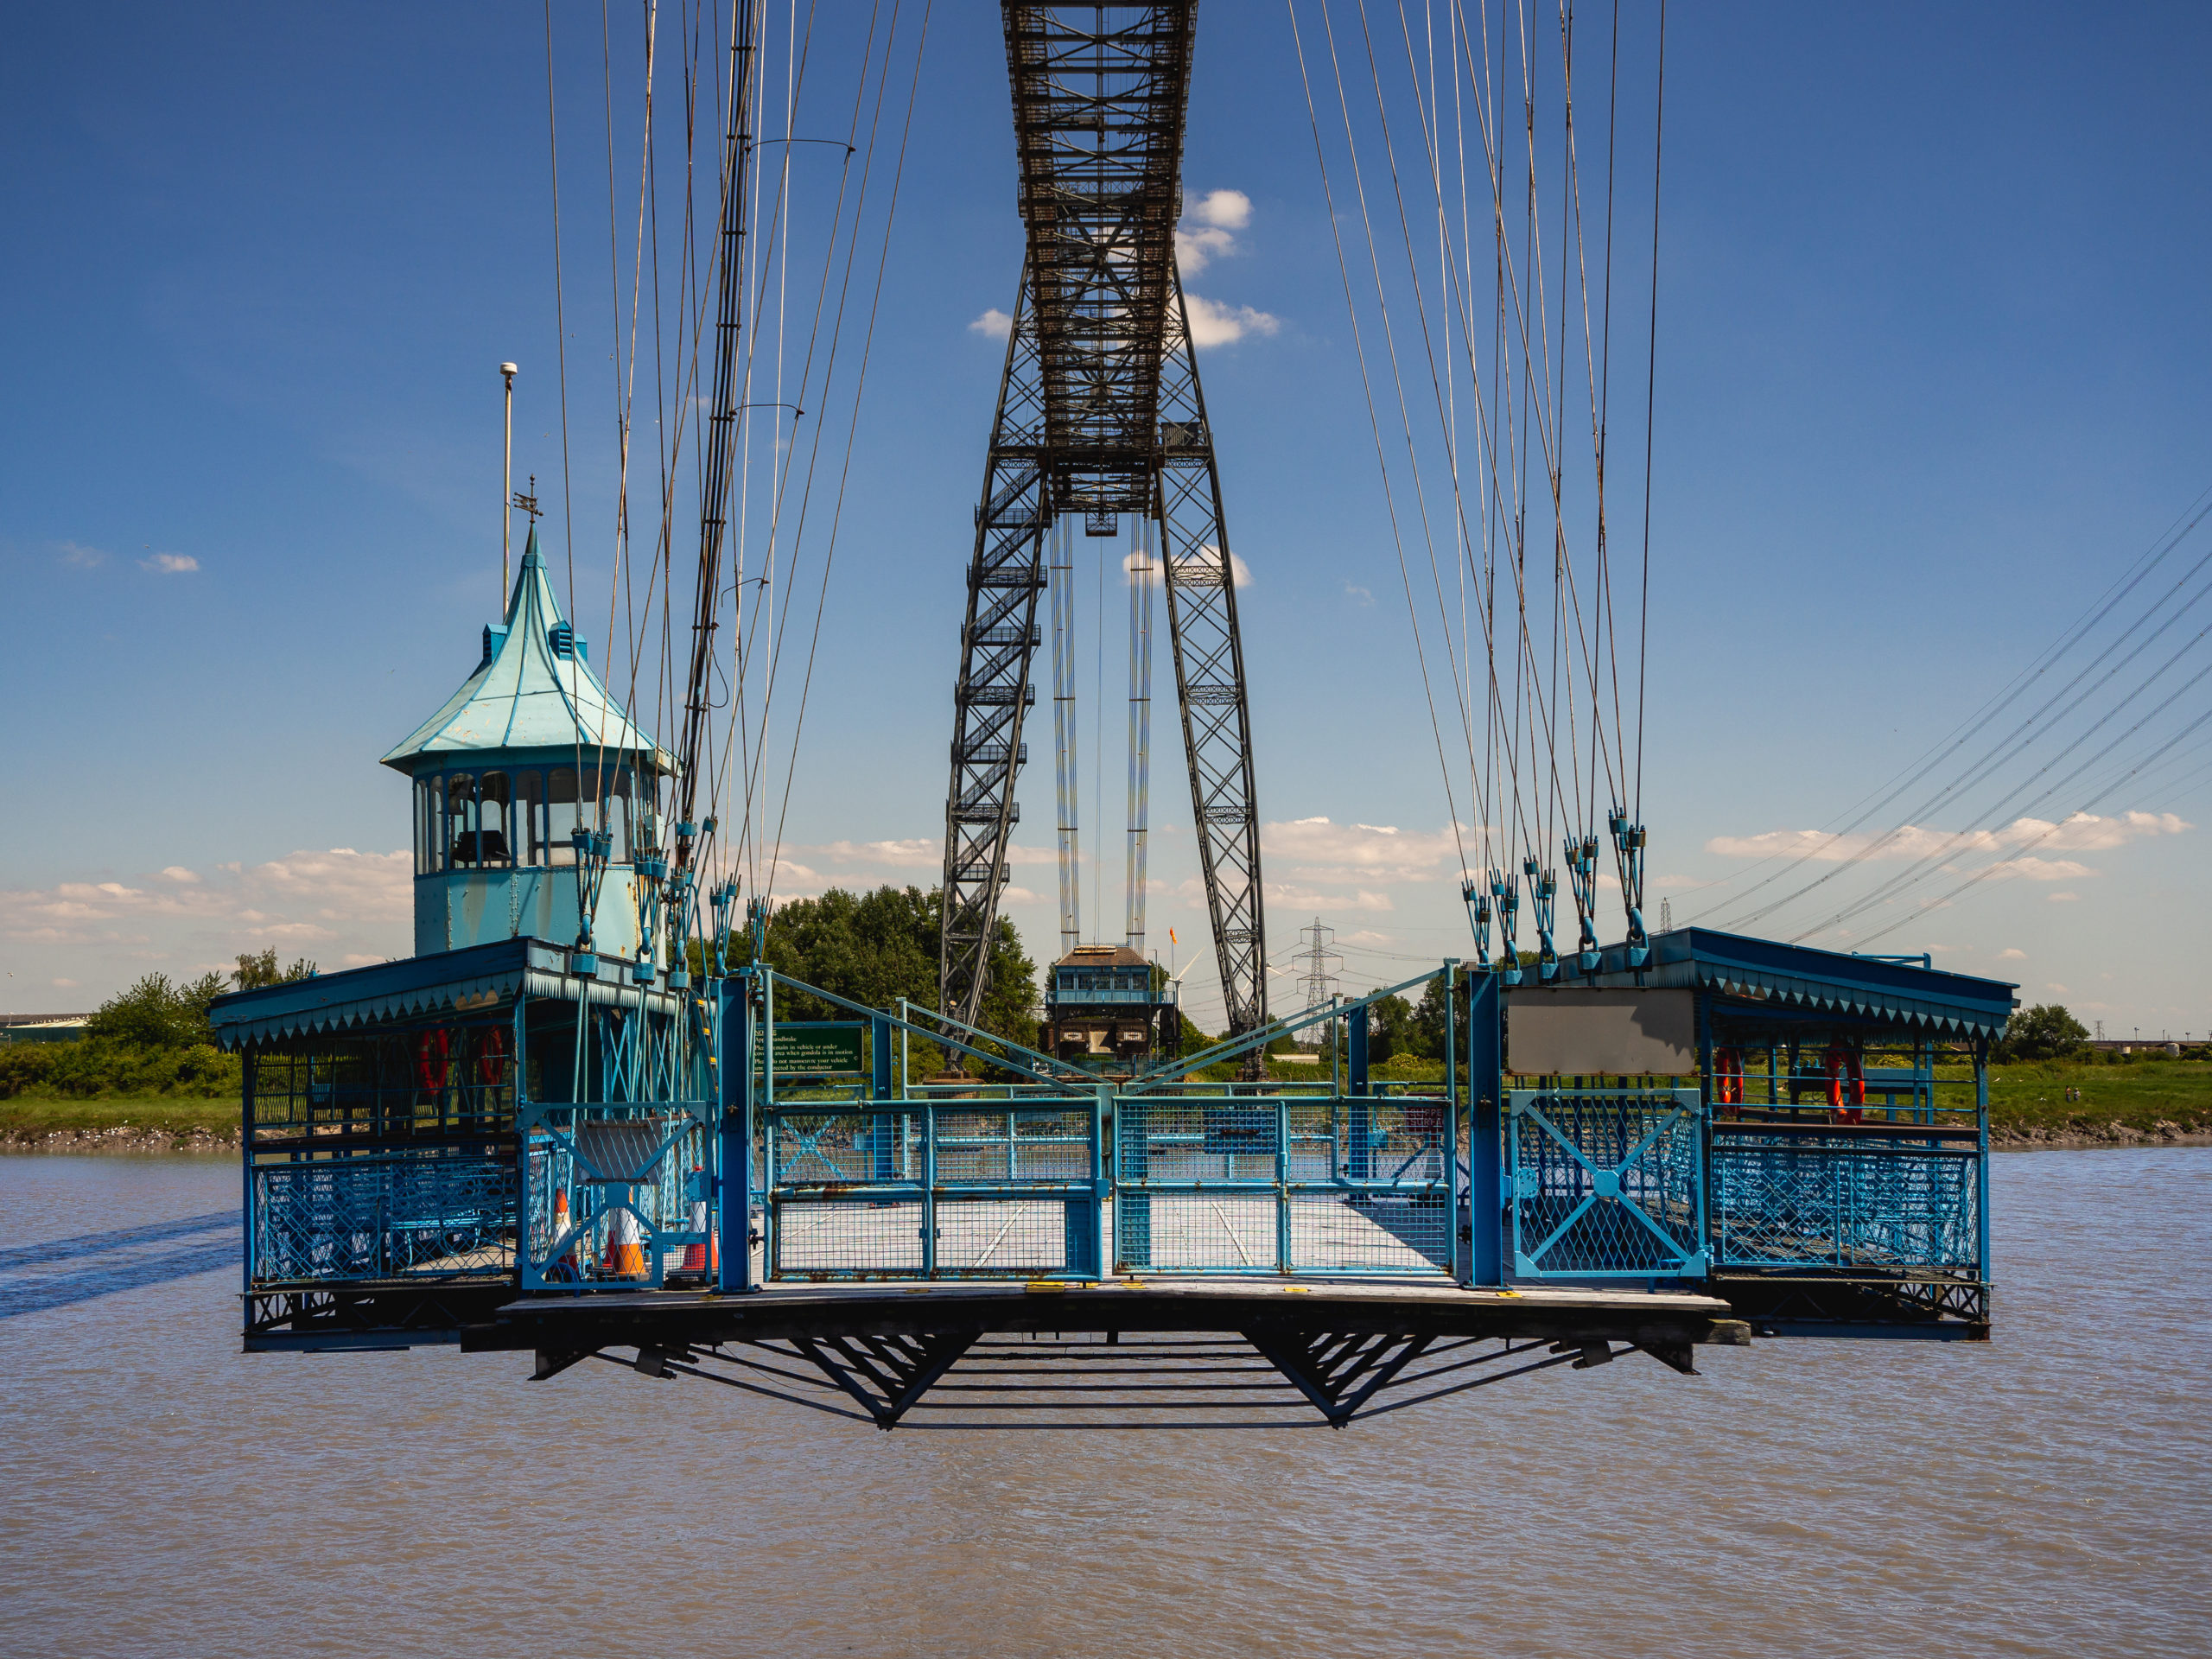 Newport Transporter Bridge from south eastern bank of River Usk, Newport, Wales, UK CaSE civil and structural engineering project